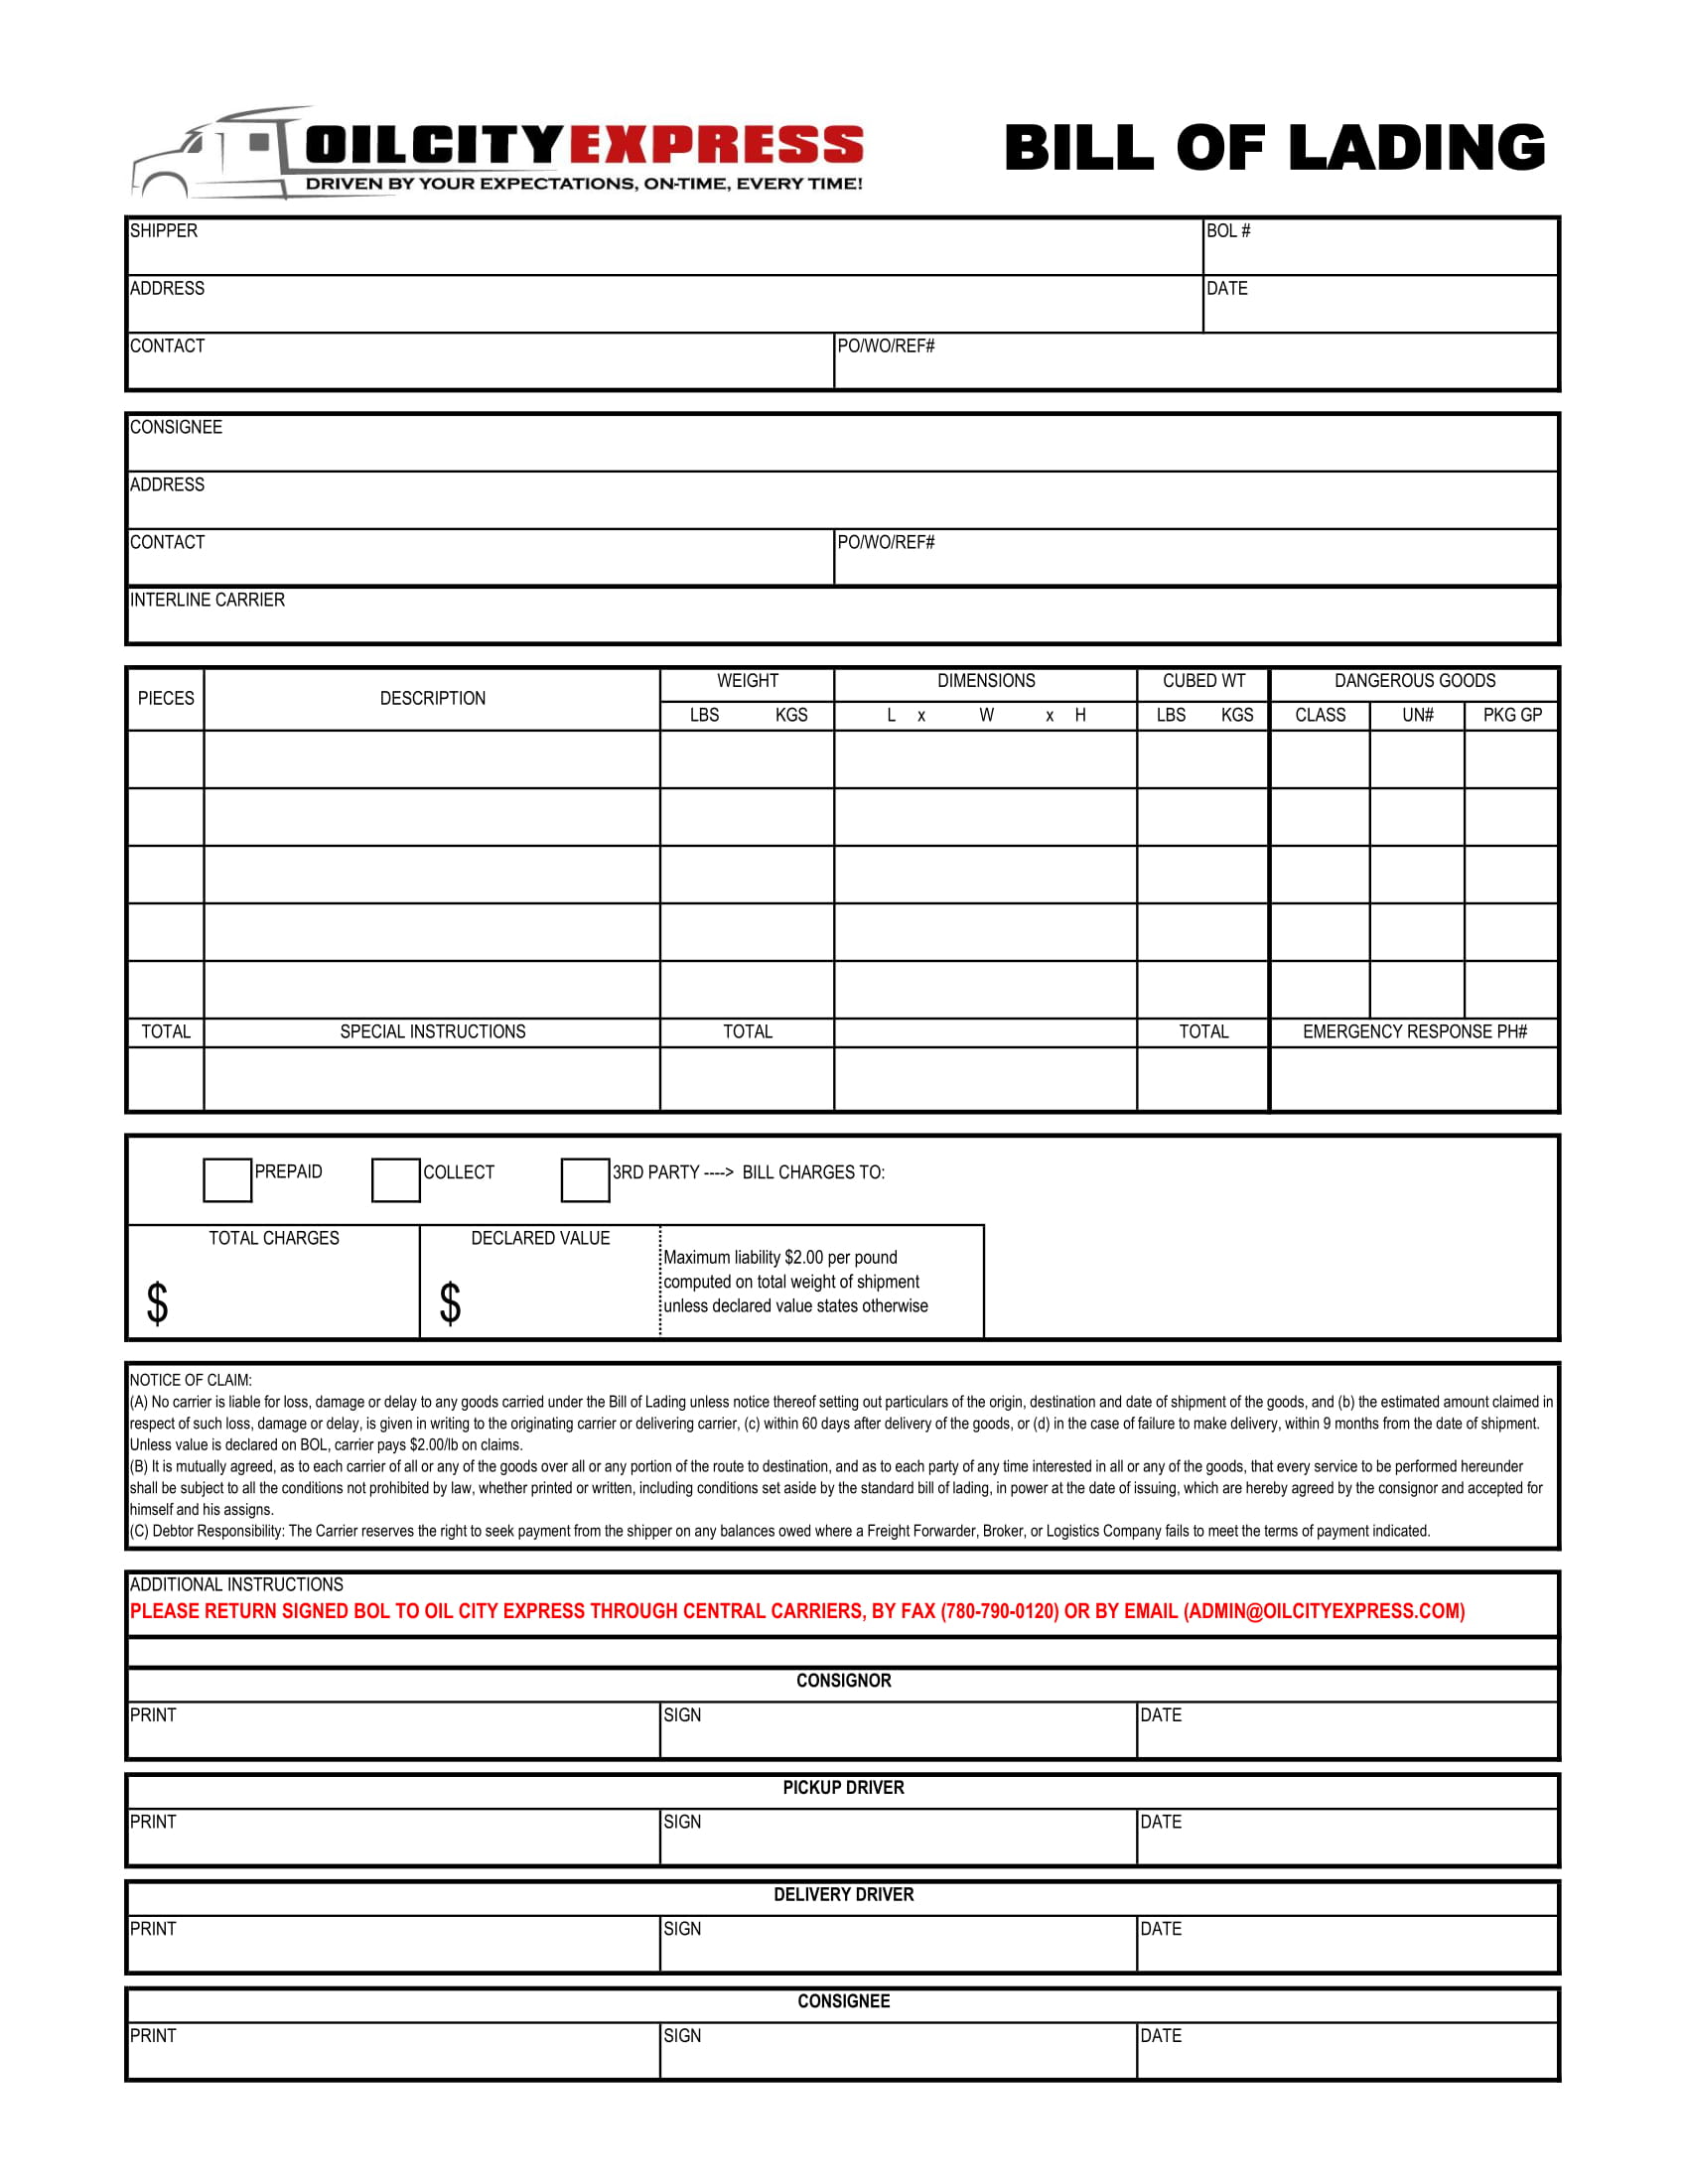 bill of lading standard template example 1